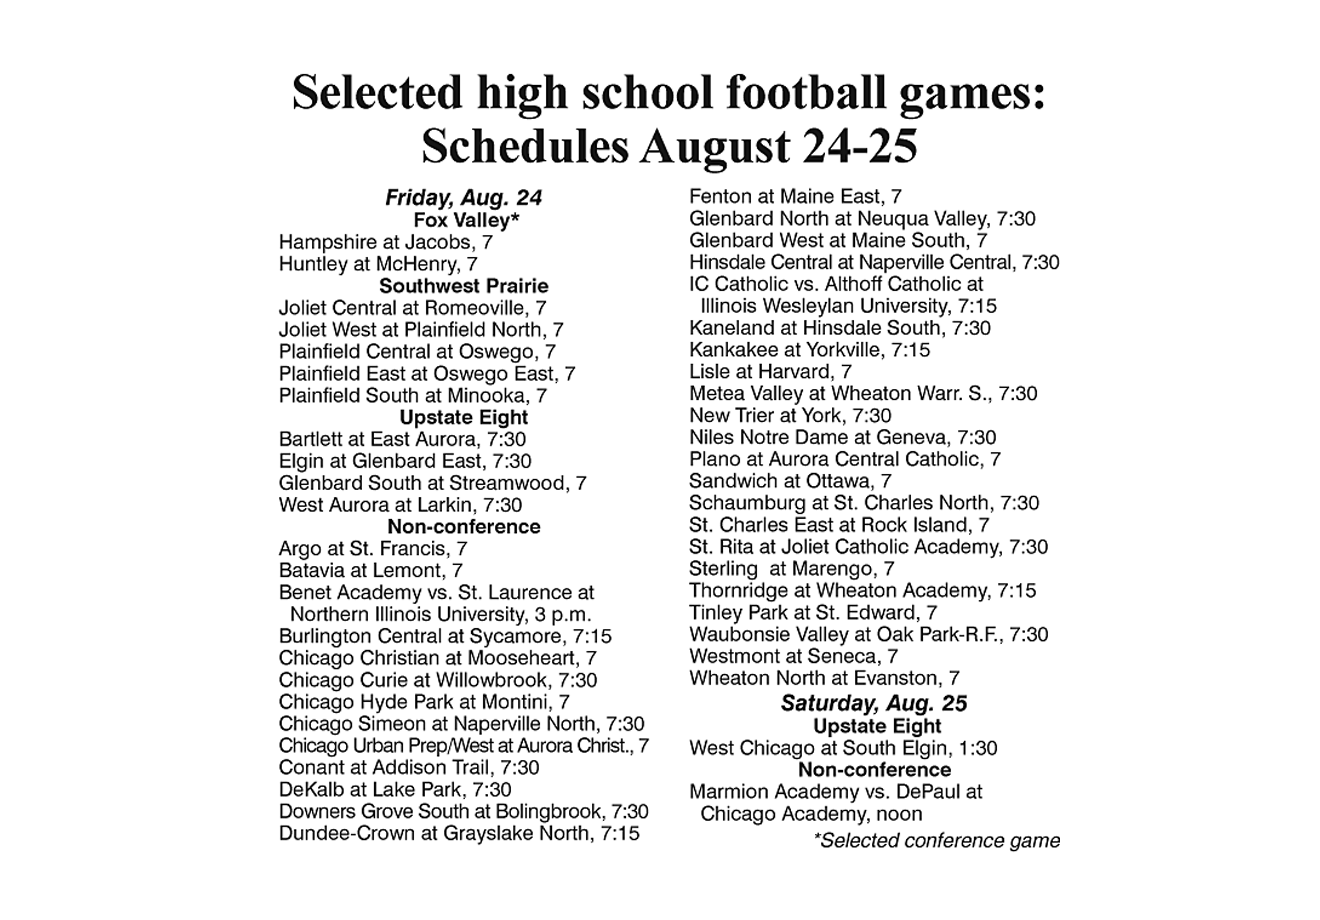 Selected high school football games: Schedules August 24-25